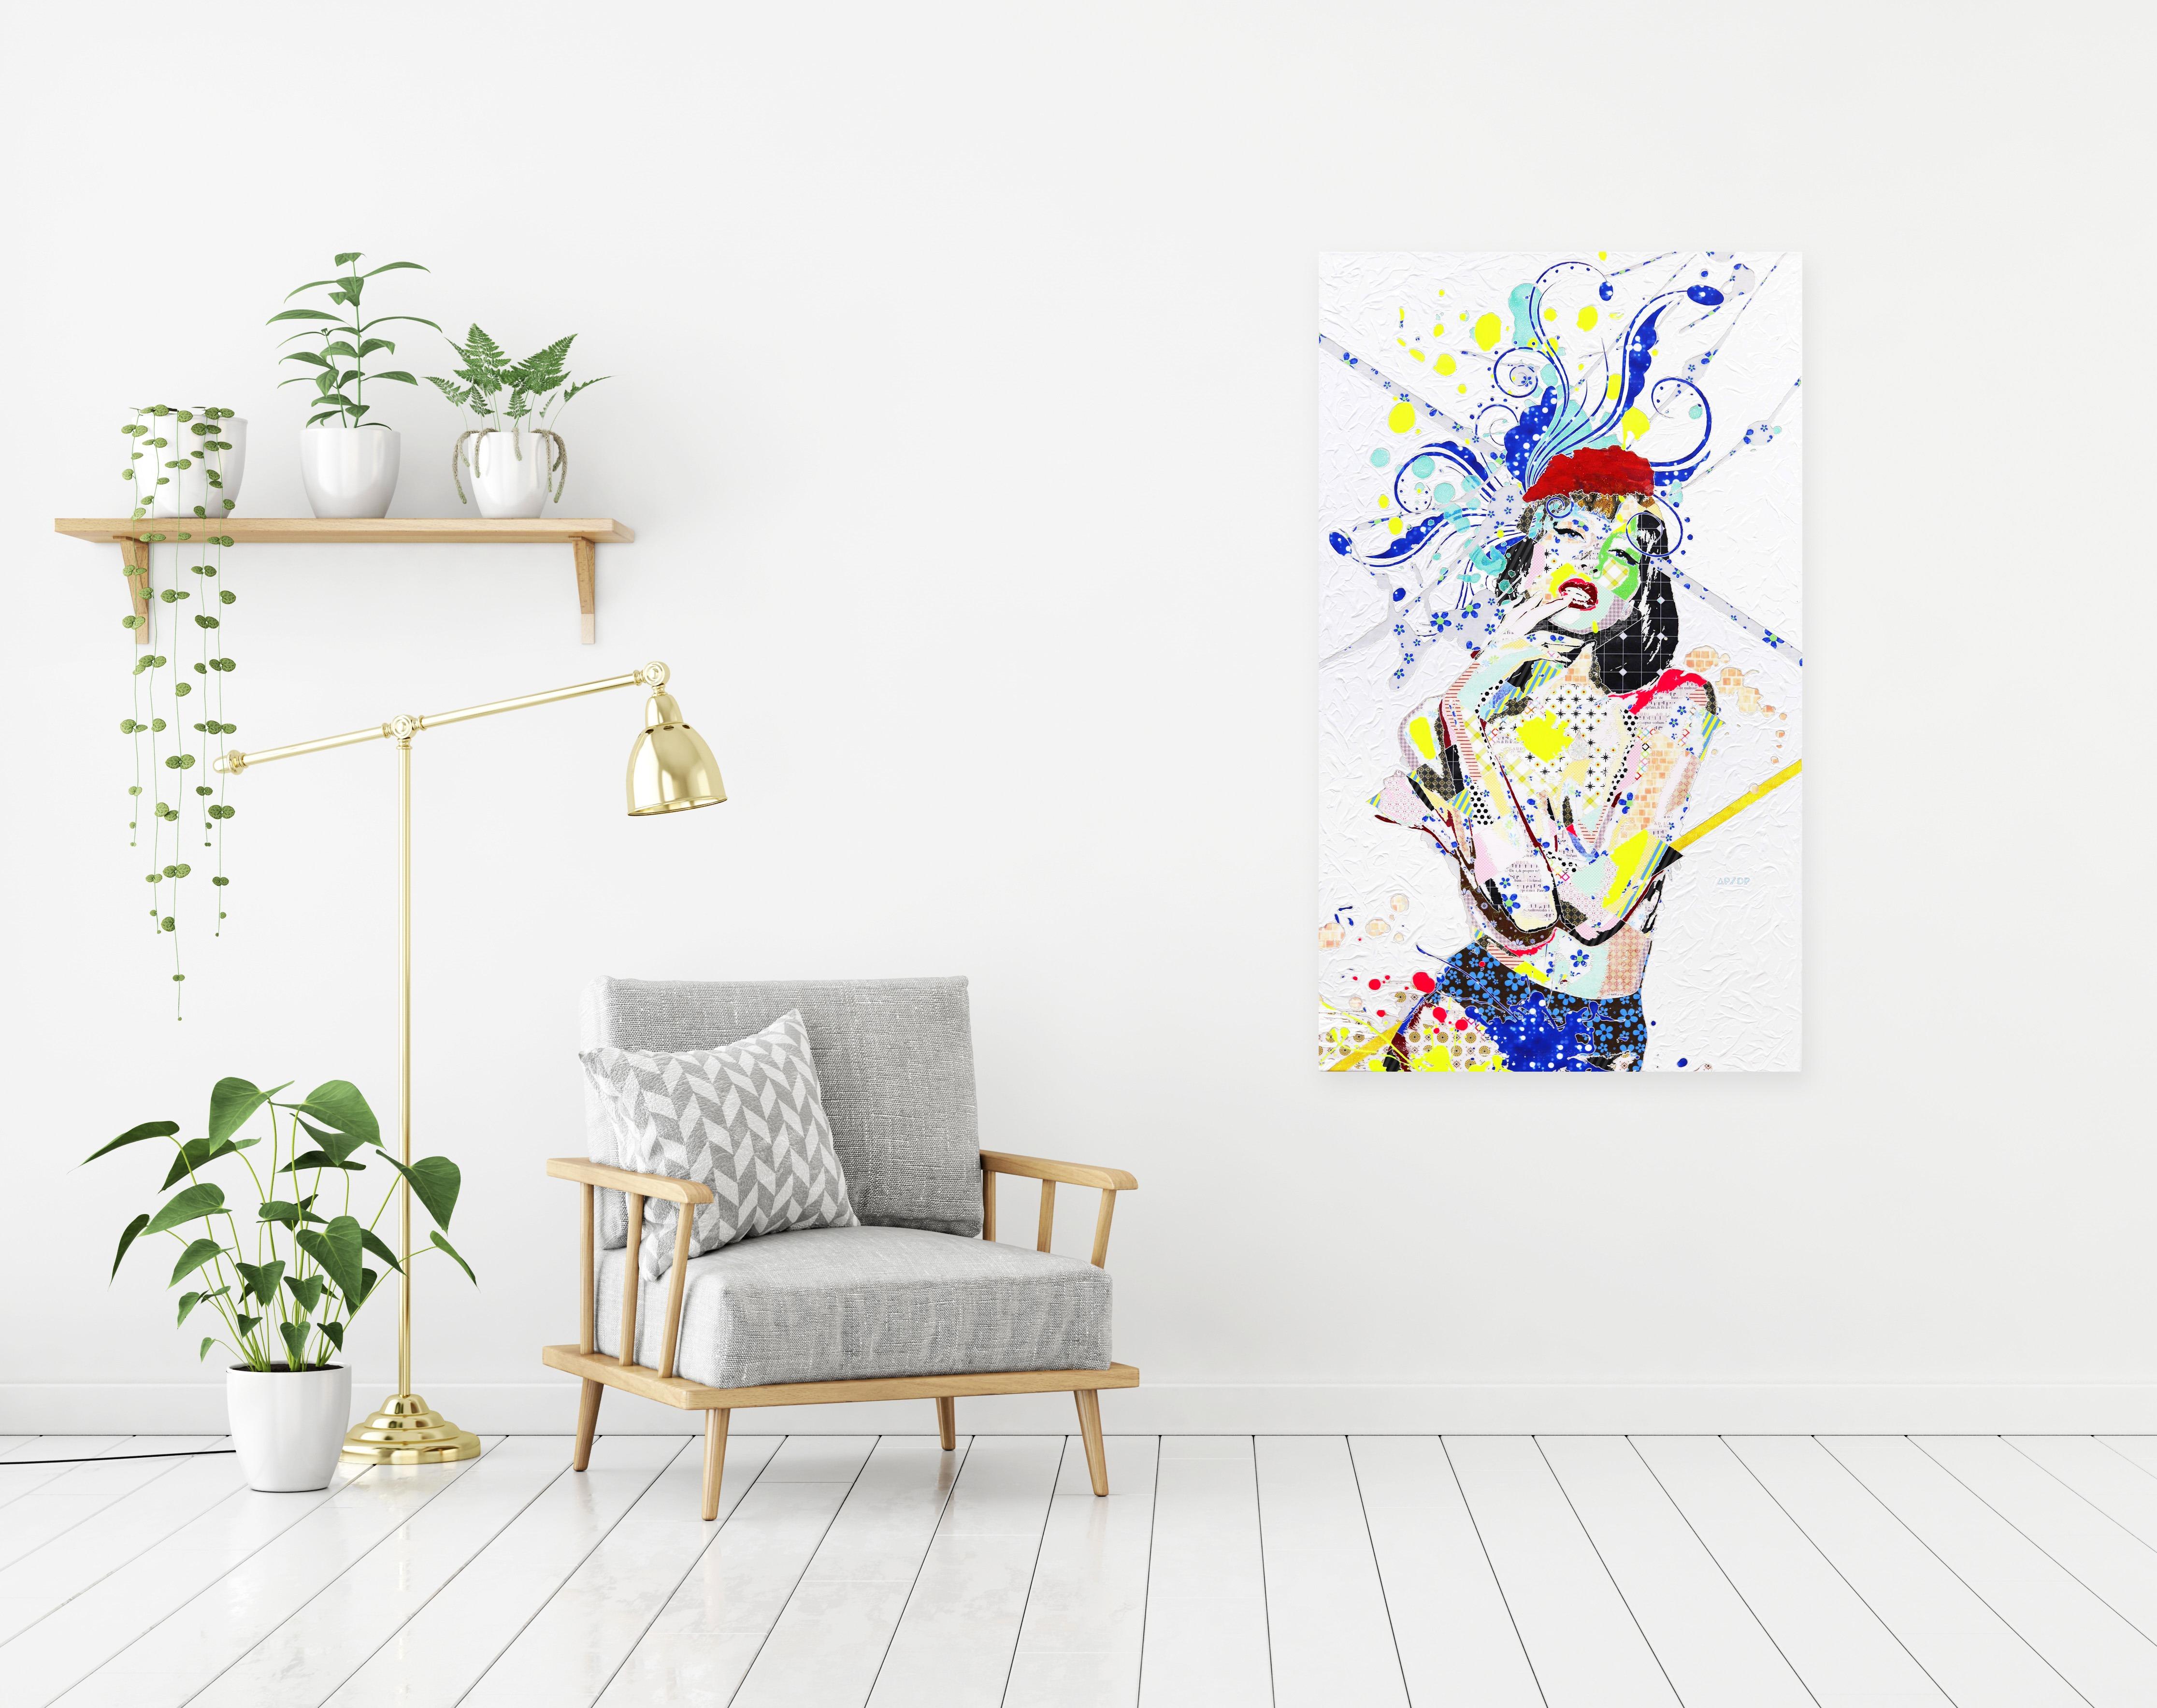 Alea Pinar Du Pre's original mixed media artworks portray human figures in a graphic pop-realist style. An enterprising autodidact merging technology and fine art, her vibrant contemporary pop-figurative artworks colorfully explore the territory